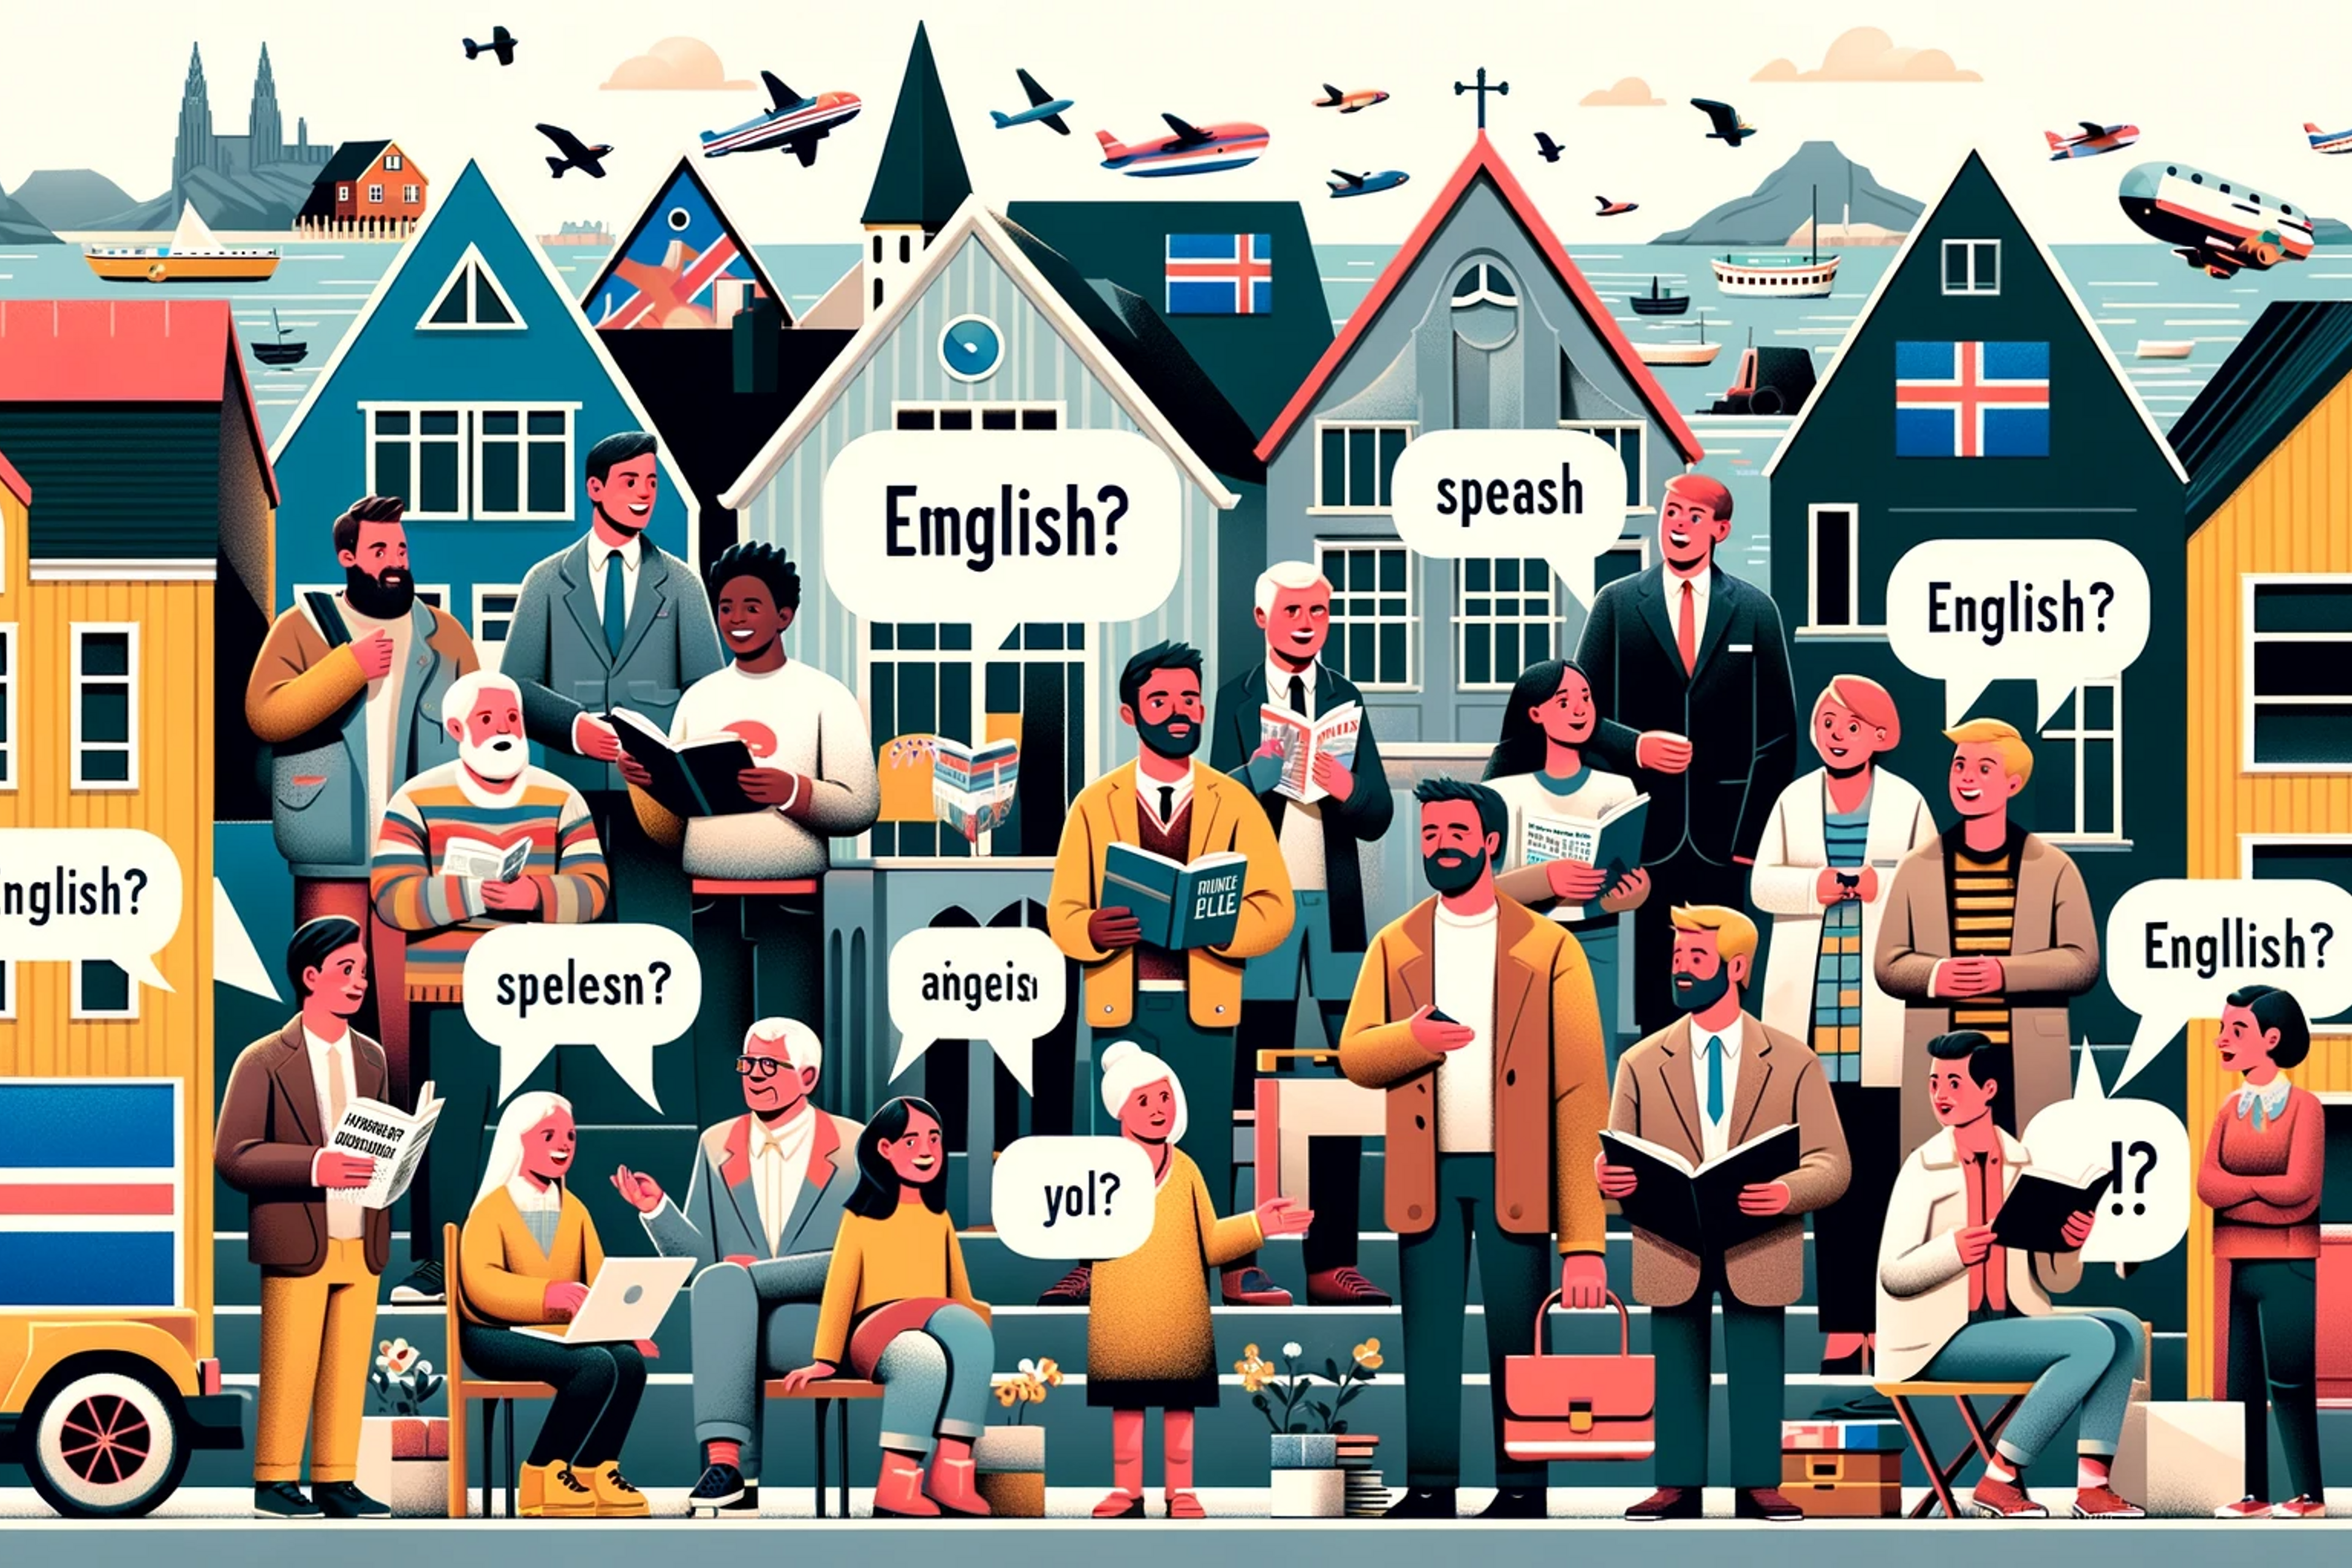 People asking if they speak English in iceland